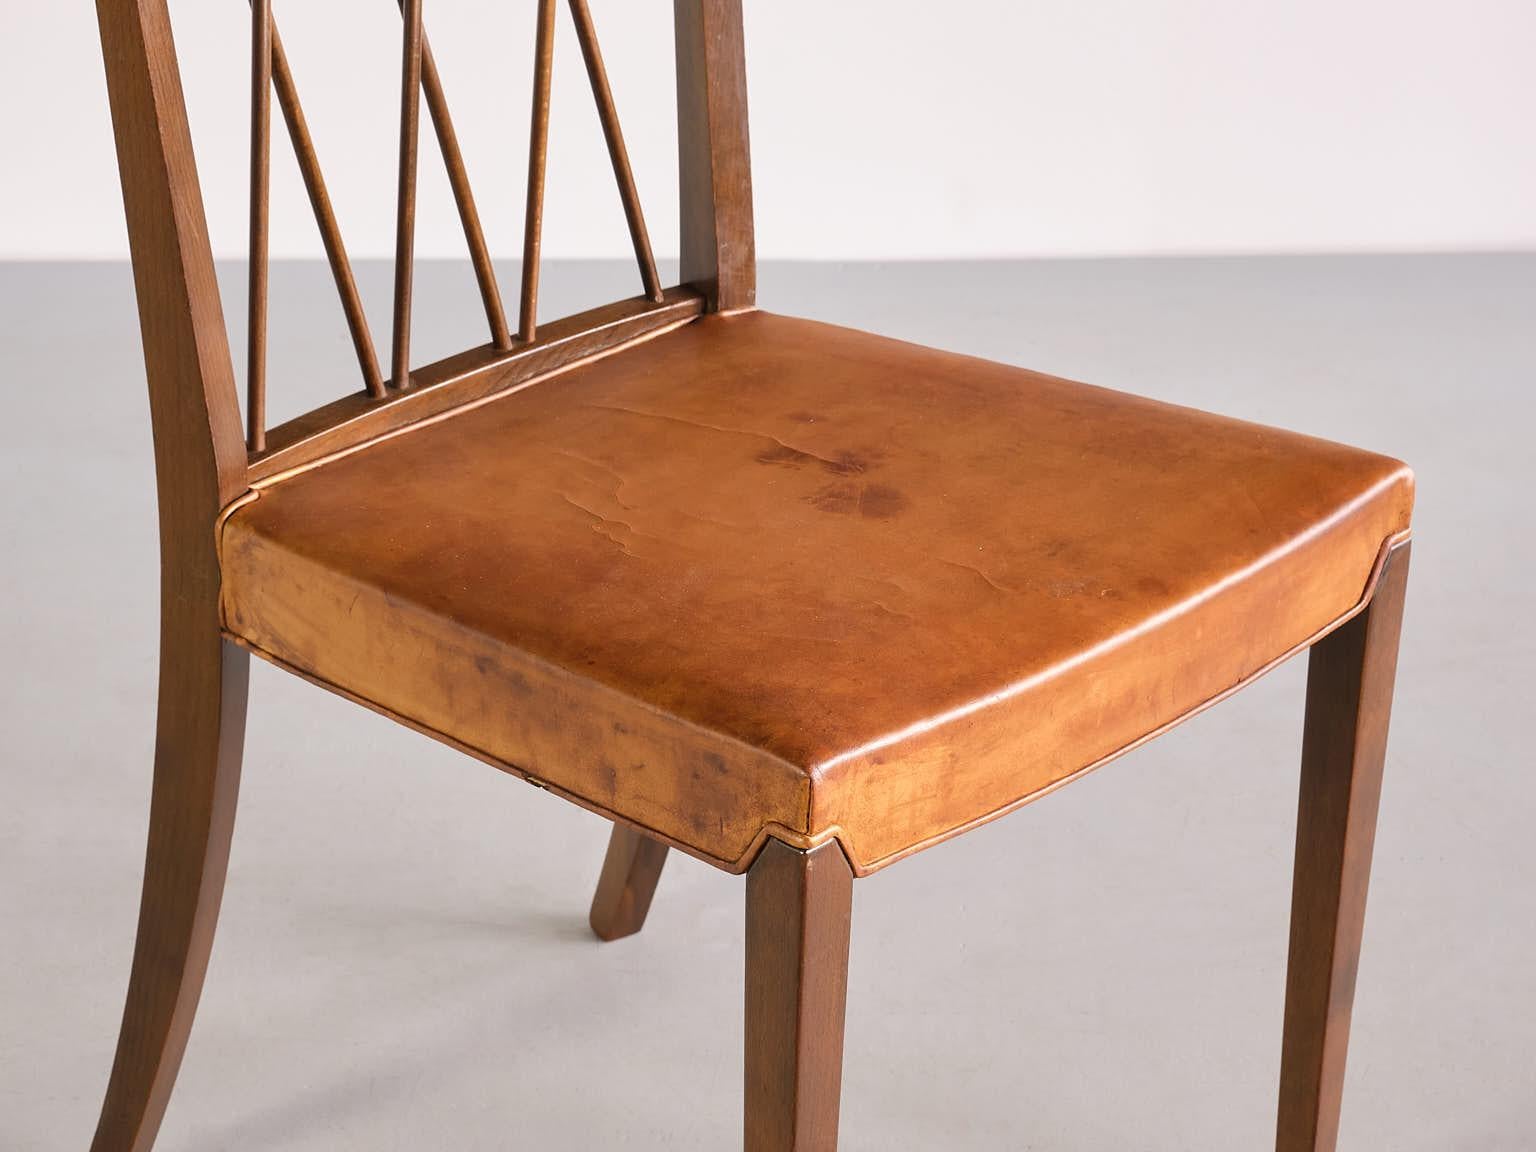 Set of Eight Frode Holm Dining Chairs, Walnut and Leather, Illum, Denmark, 1940s For Sale 3